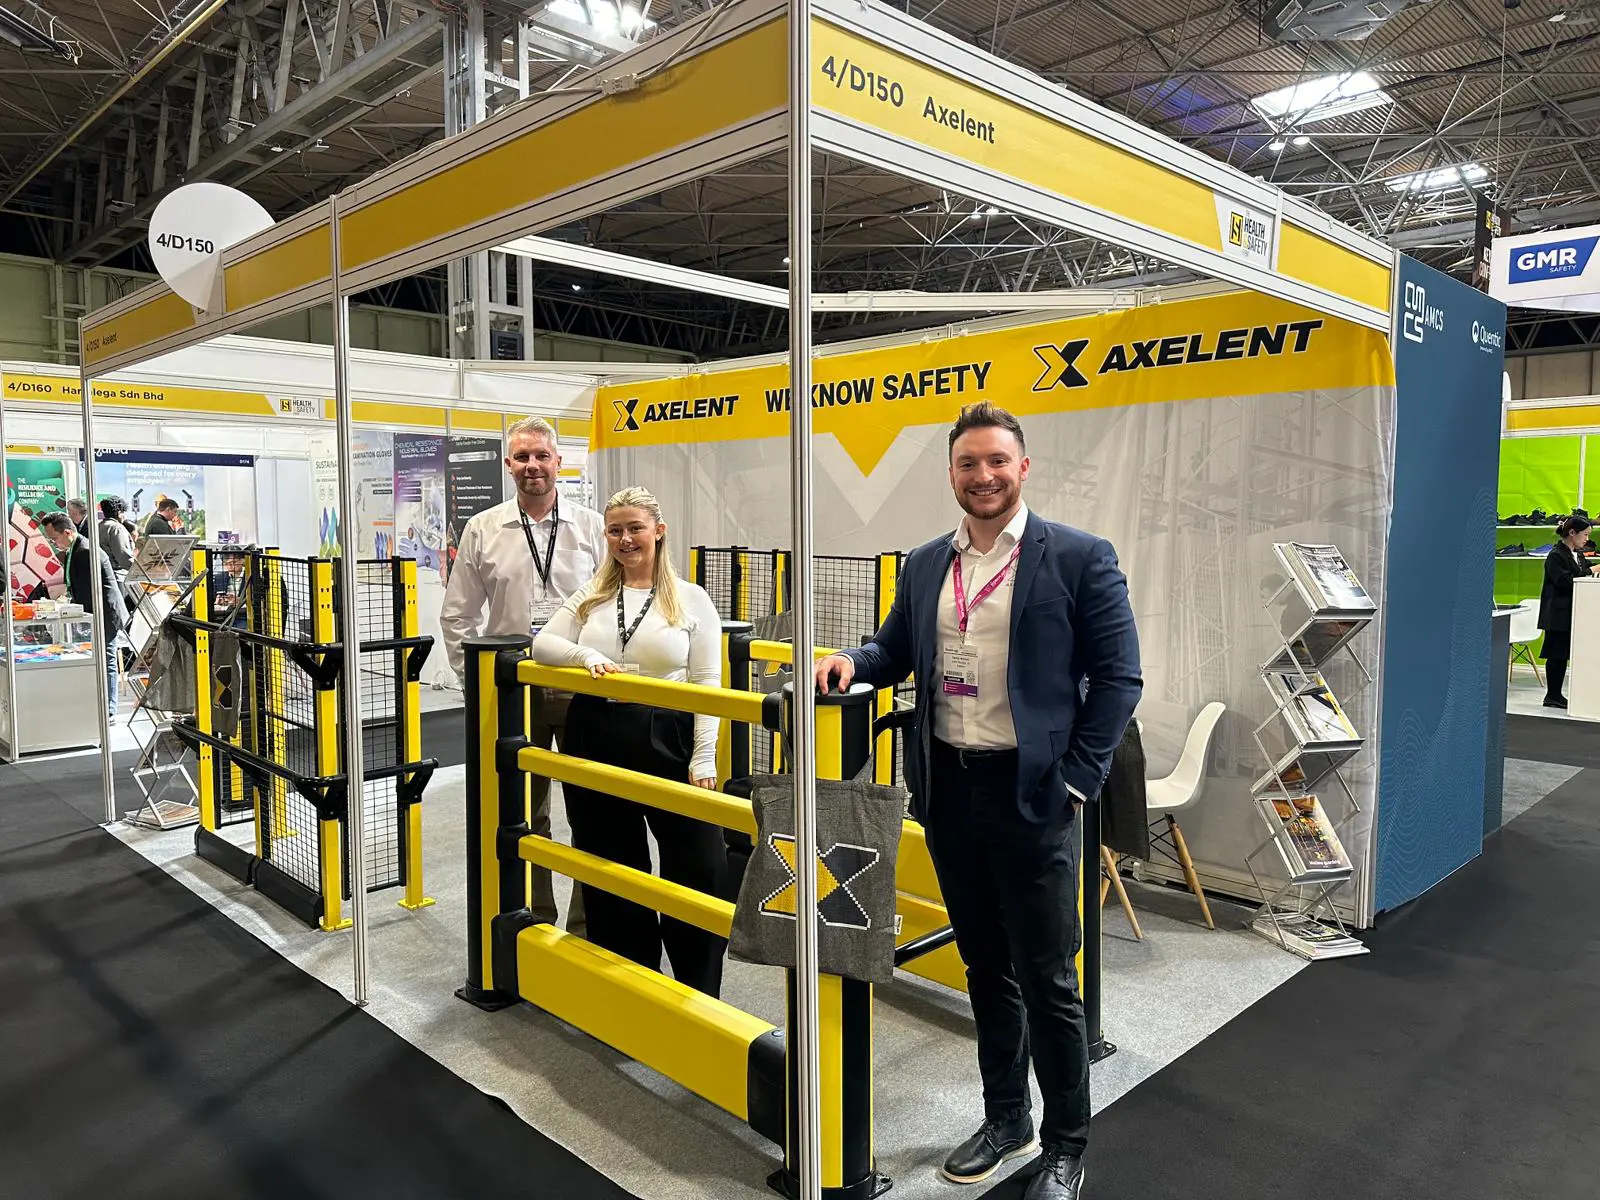 Axelent exhibition stand at health and safety event